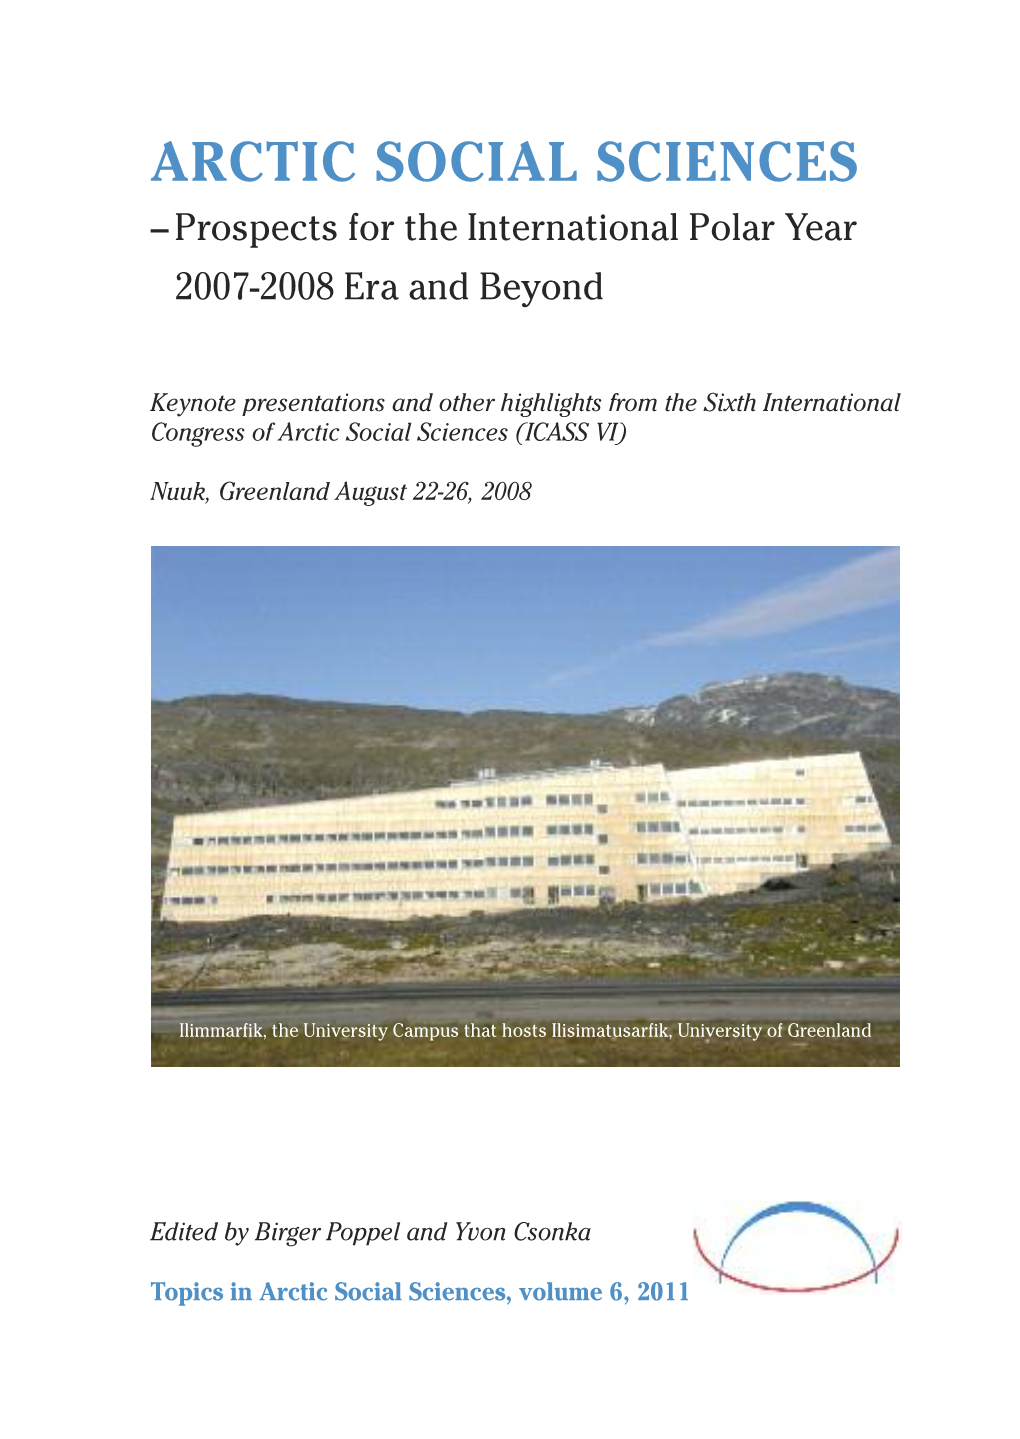 ARCTIC SOCIAL SCIENCES – Prospects for the International Polar Year 2007-2008 Era and Beyond